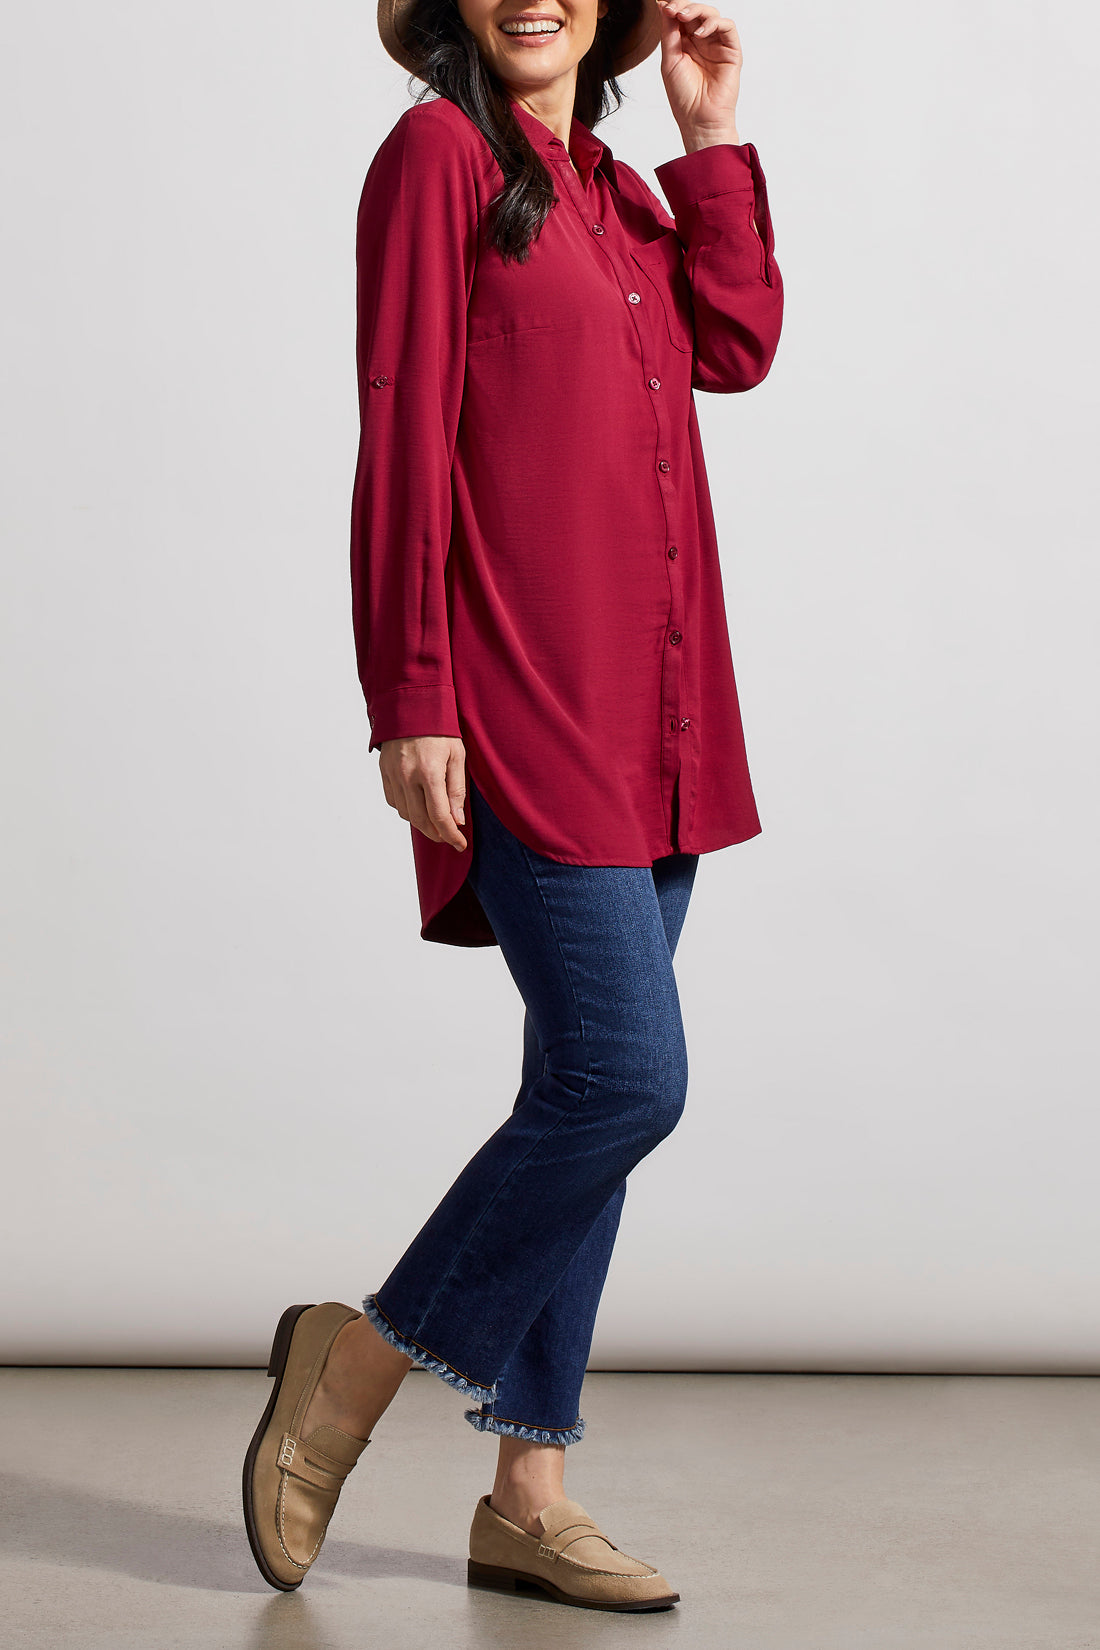 Tunic Top With Roll Up Sleeves 7878O-4835